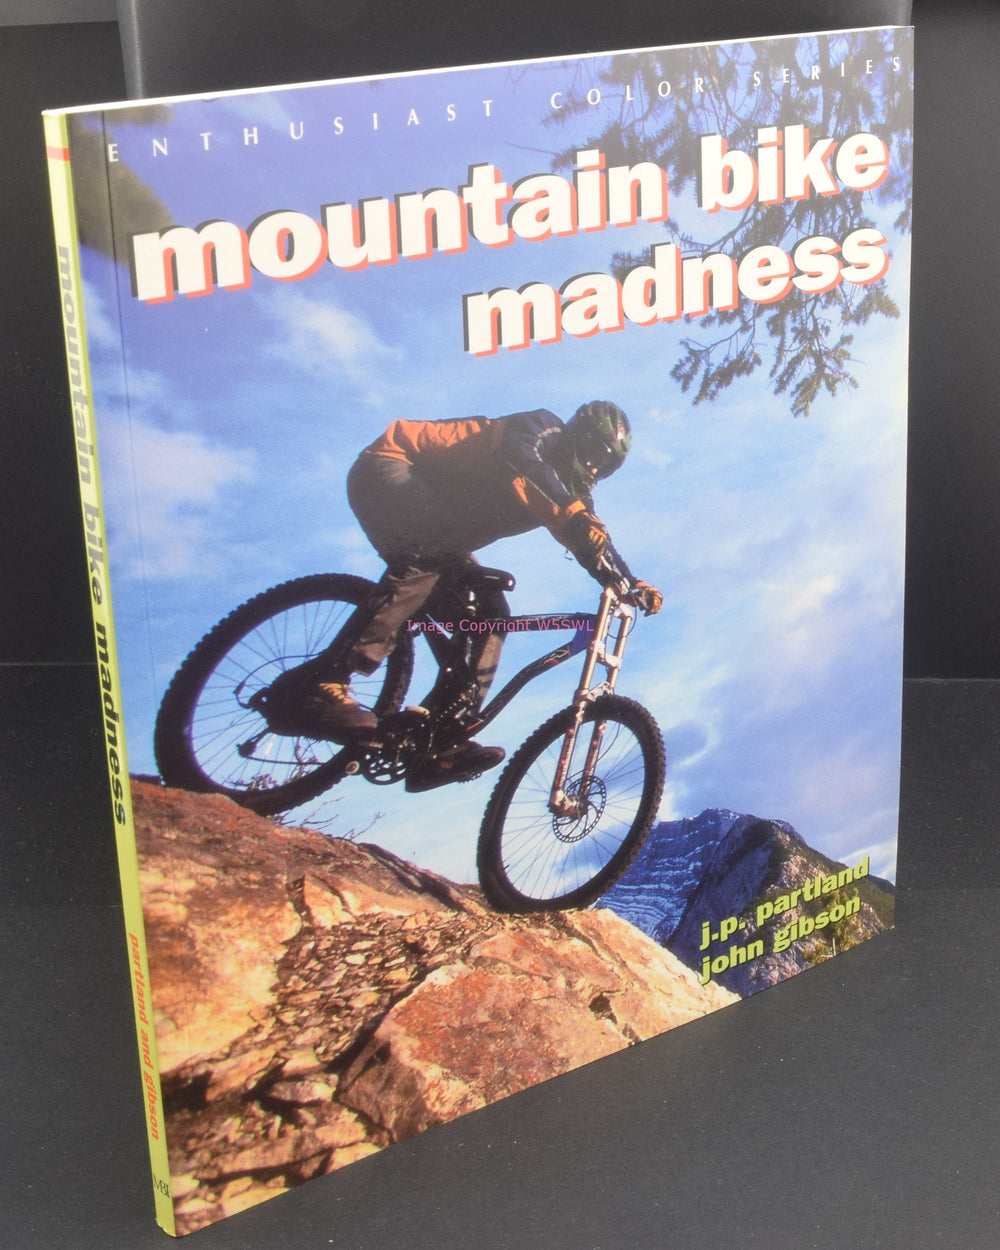 Mountain Bike Madness by Partland and Gibson - Dave's Hobby Shop by W5SWL